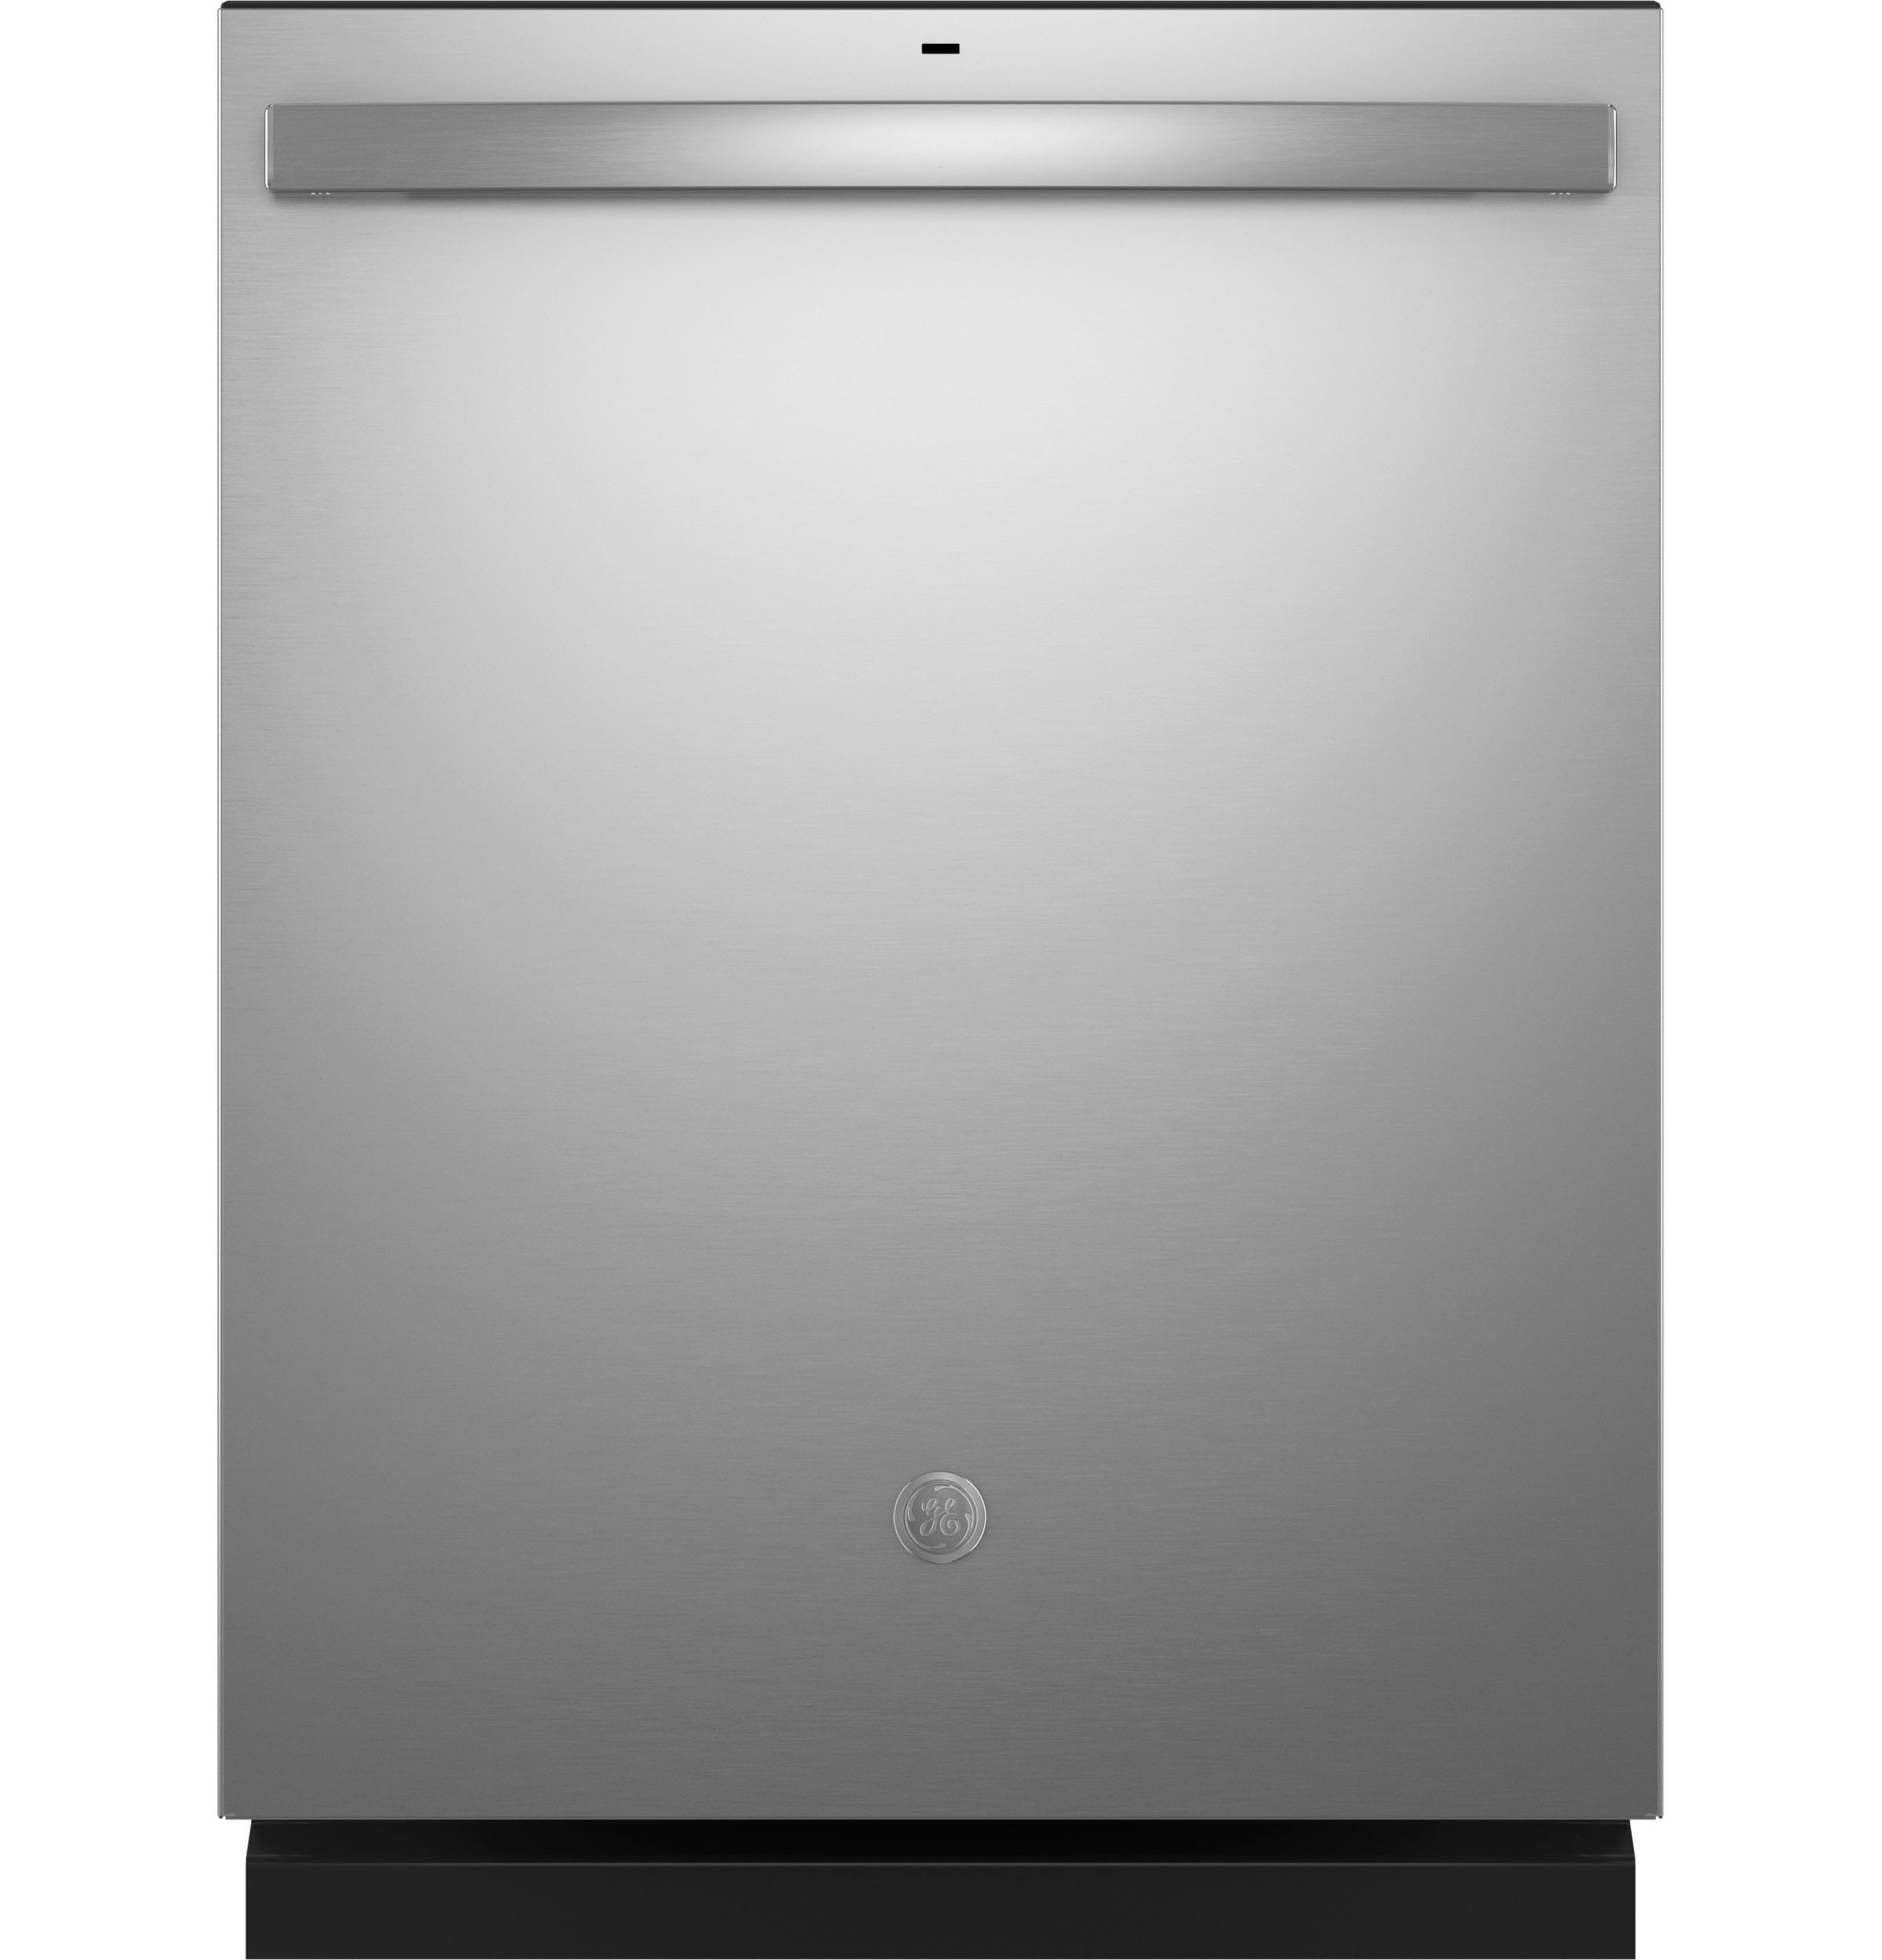 4th of July sale: Get discounted dishwashers from Best Buy and more